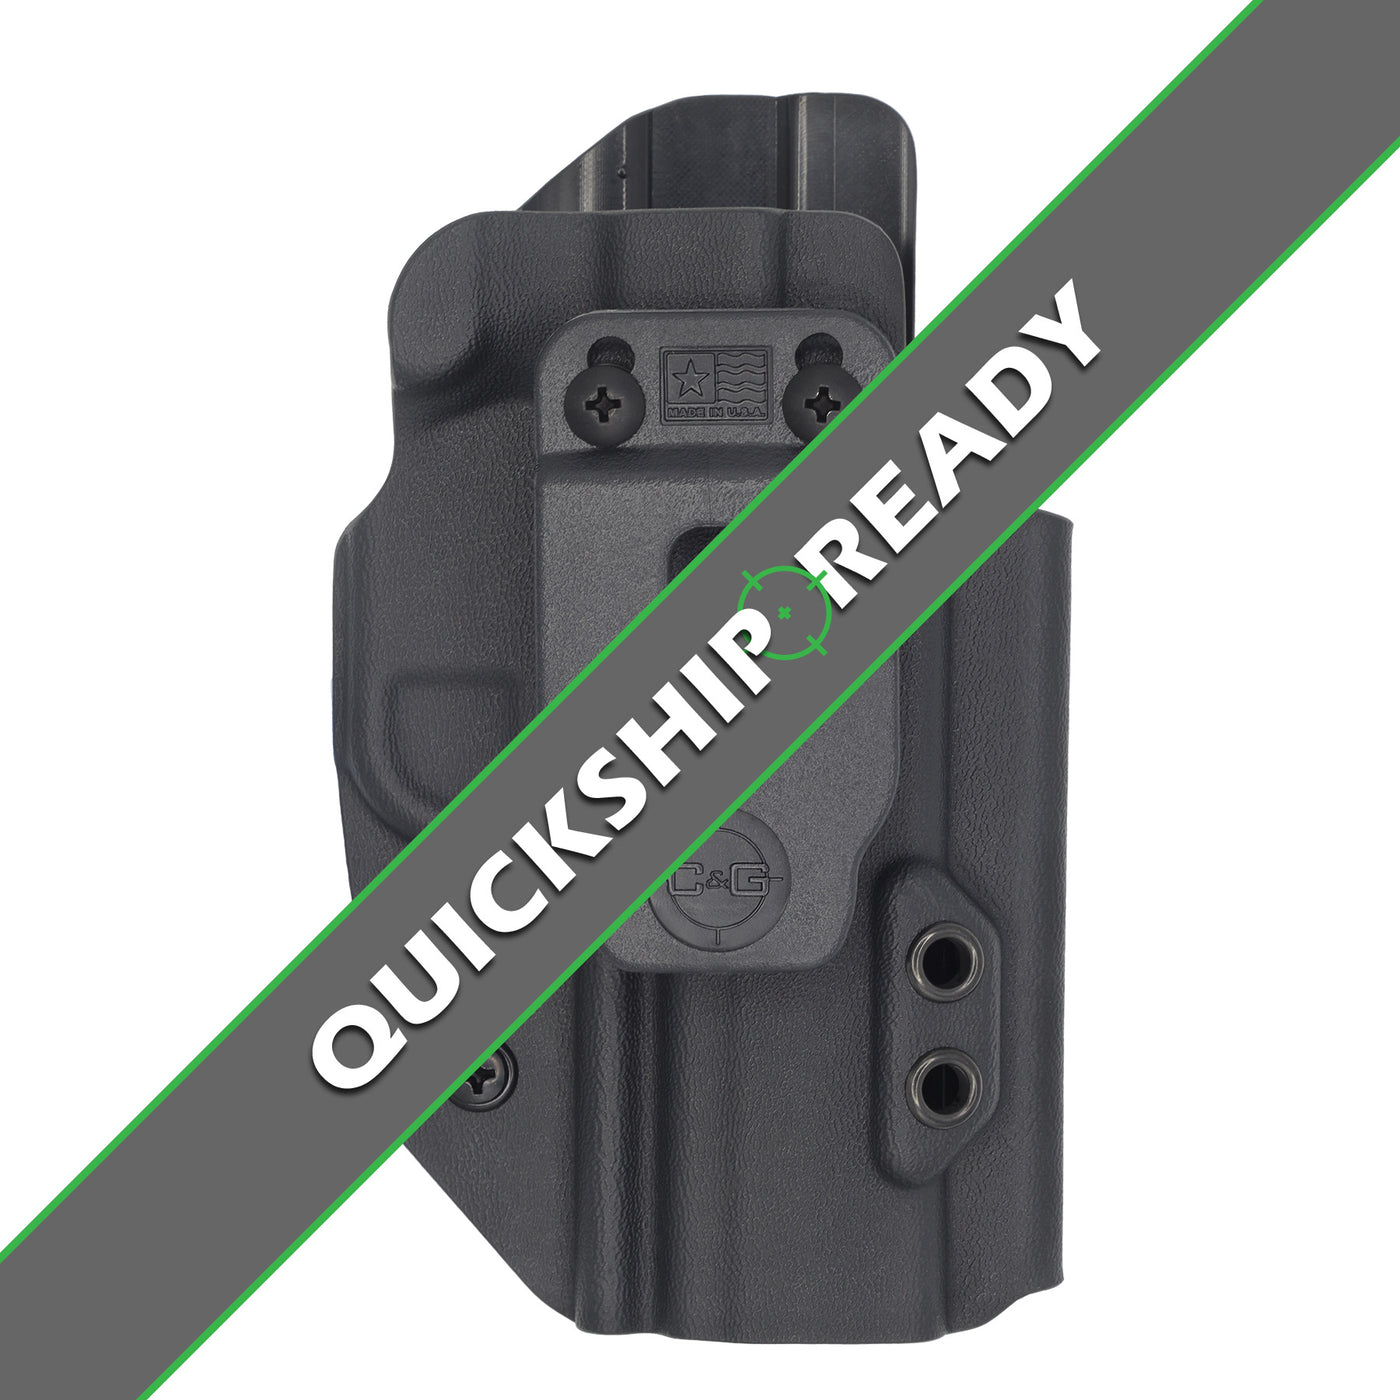 FN509T IWB Holster made by C and G Holsters. With a Banner overlay for the quickship option